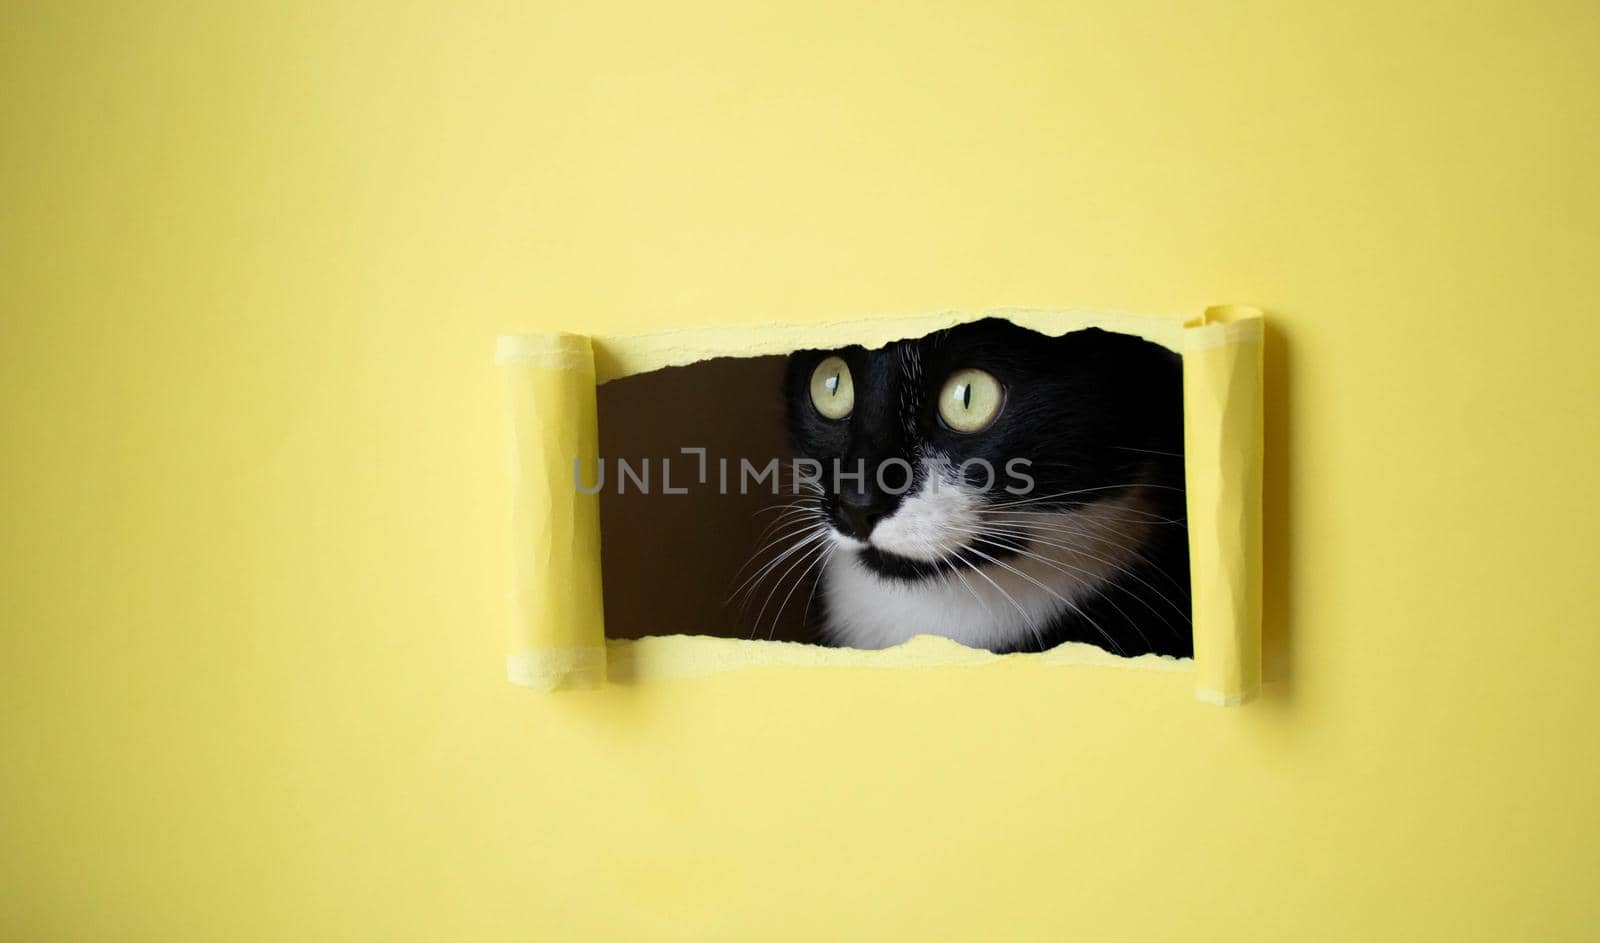 Cute black kitten with a white muzzle peeks into a rectangular hole on a yellow background by lapushka62